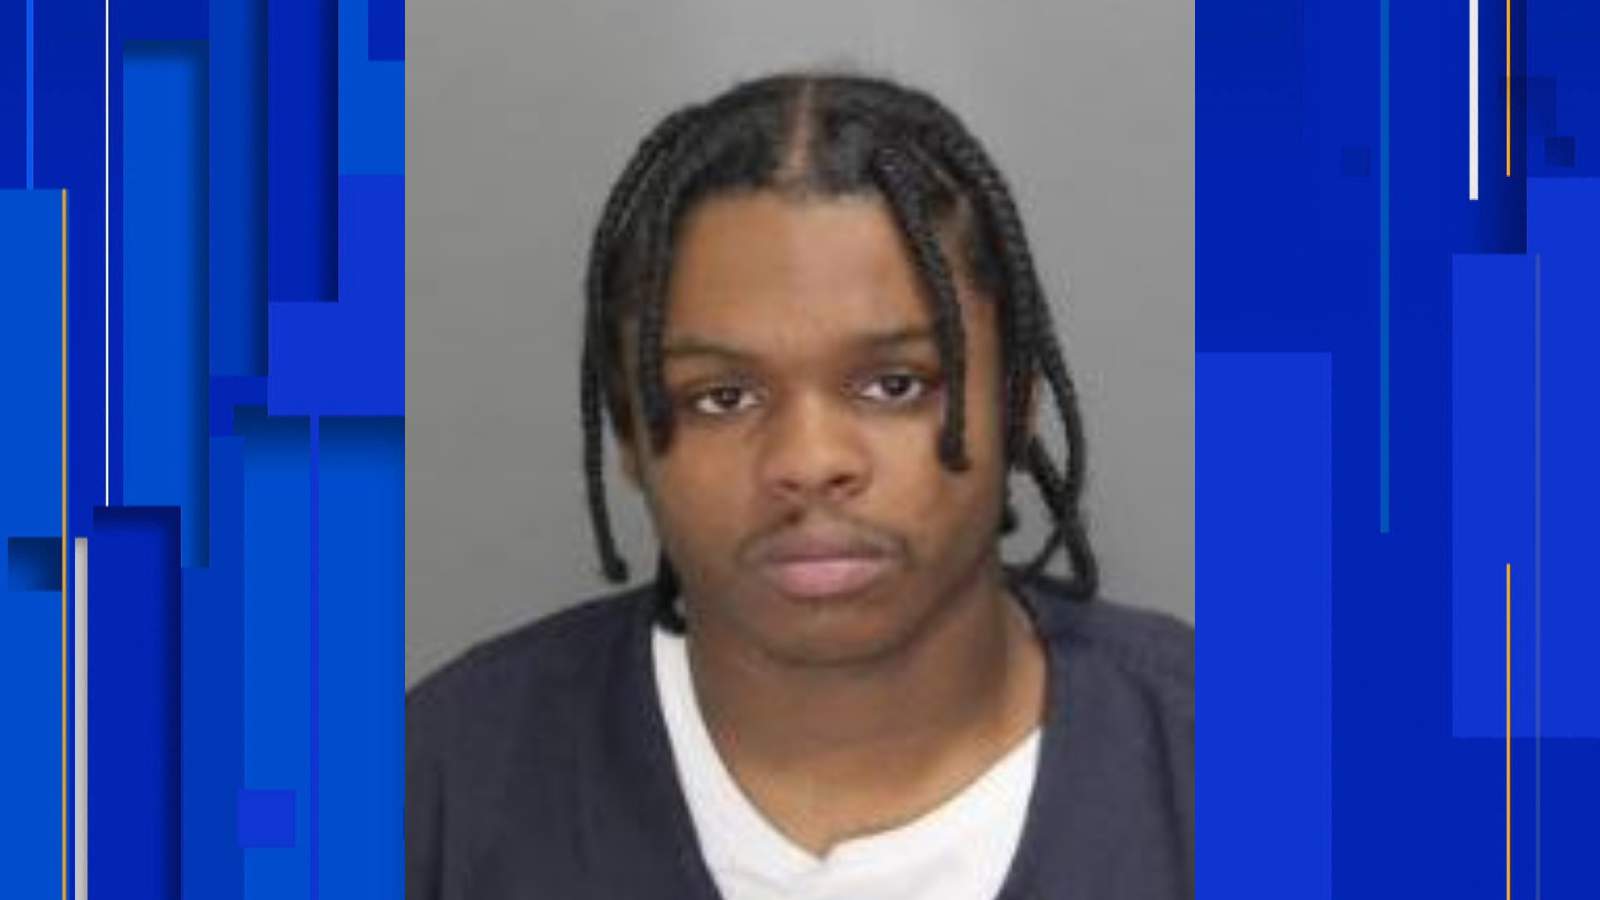 Detroit rapper 42 Dugg arrested 2 months after fleeing from police in Oakland County